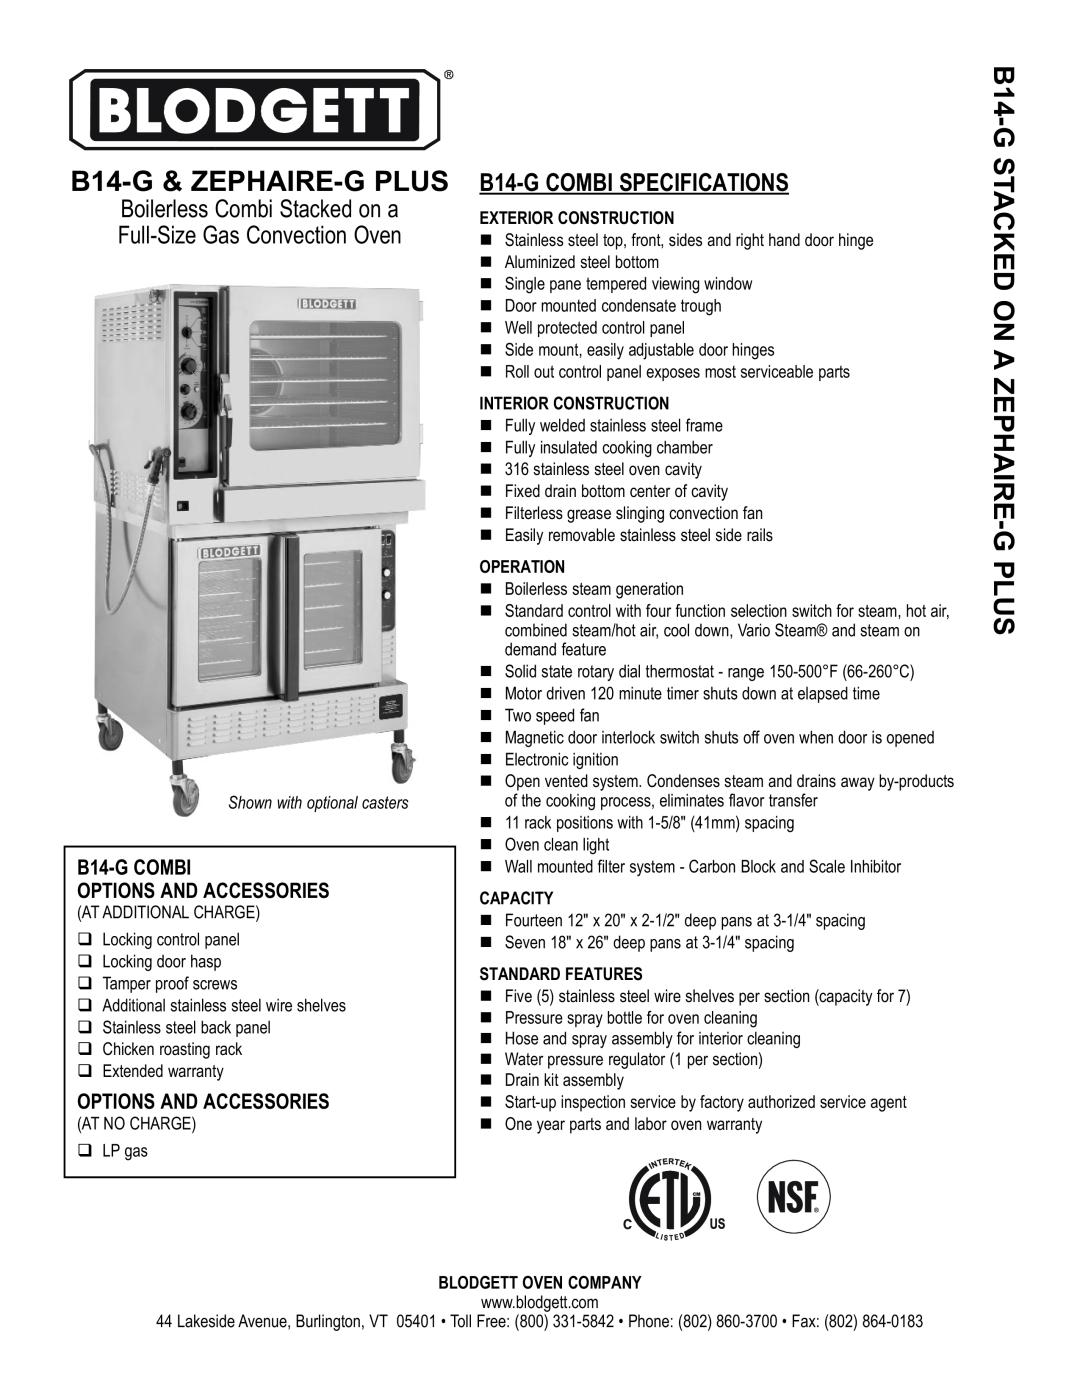 Blodgett B14-G COMBI SPECIFICATIONS, B14-G COMBI OPTIONS AND ACCESSORIES, Exterior Construction, Interior Construction 